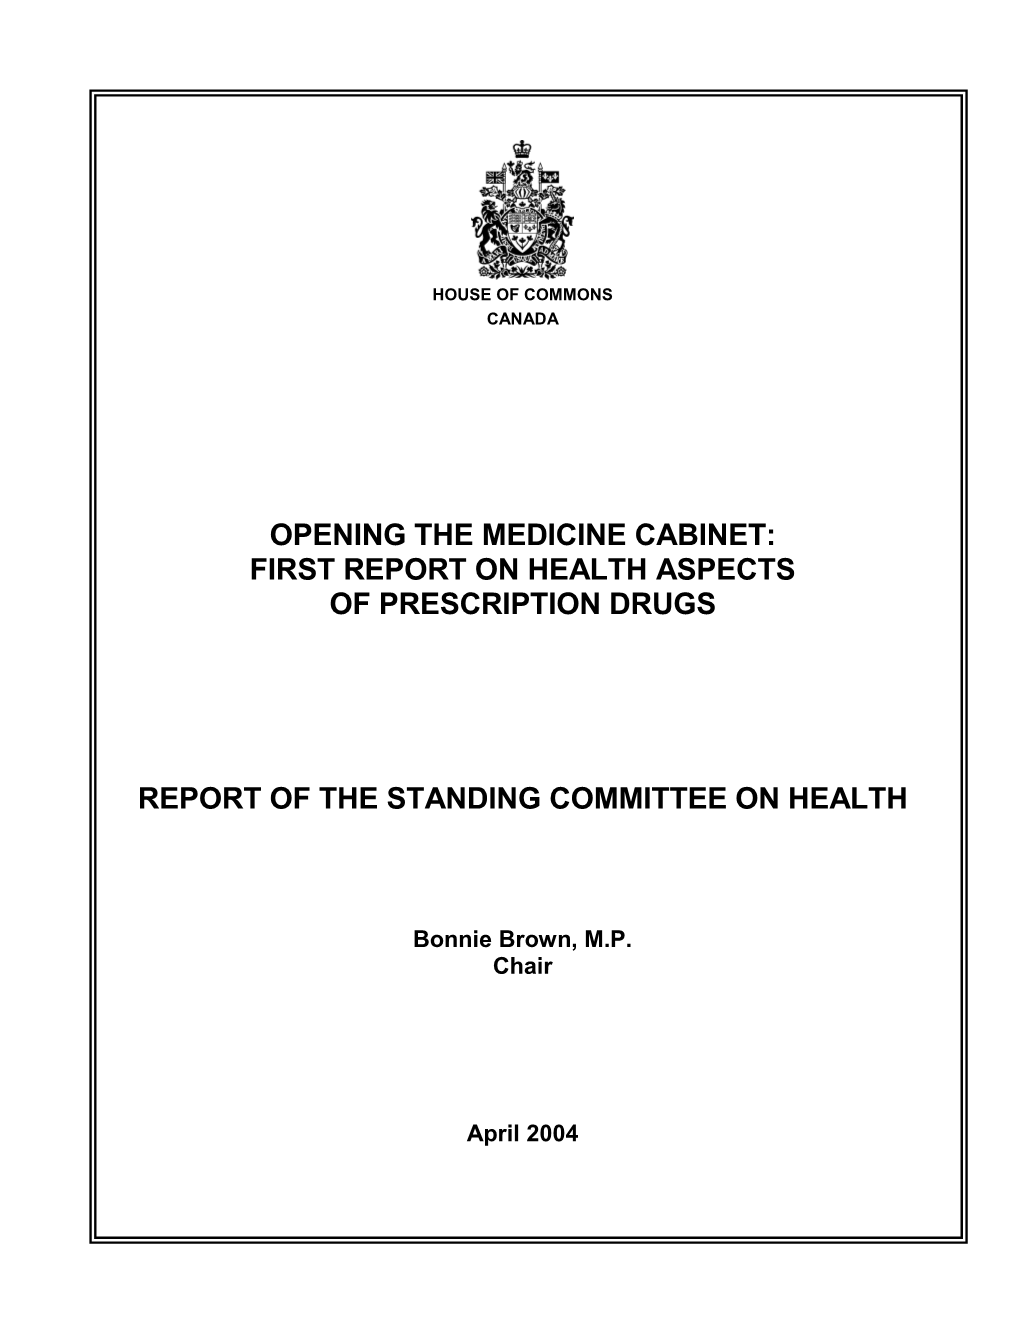 Opening the Medicine Cabinet: First Report on Health Aspects of Prescription Drugs